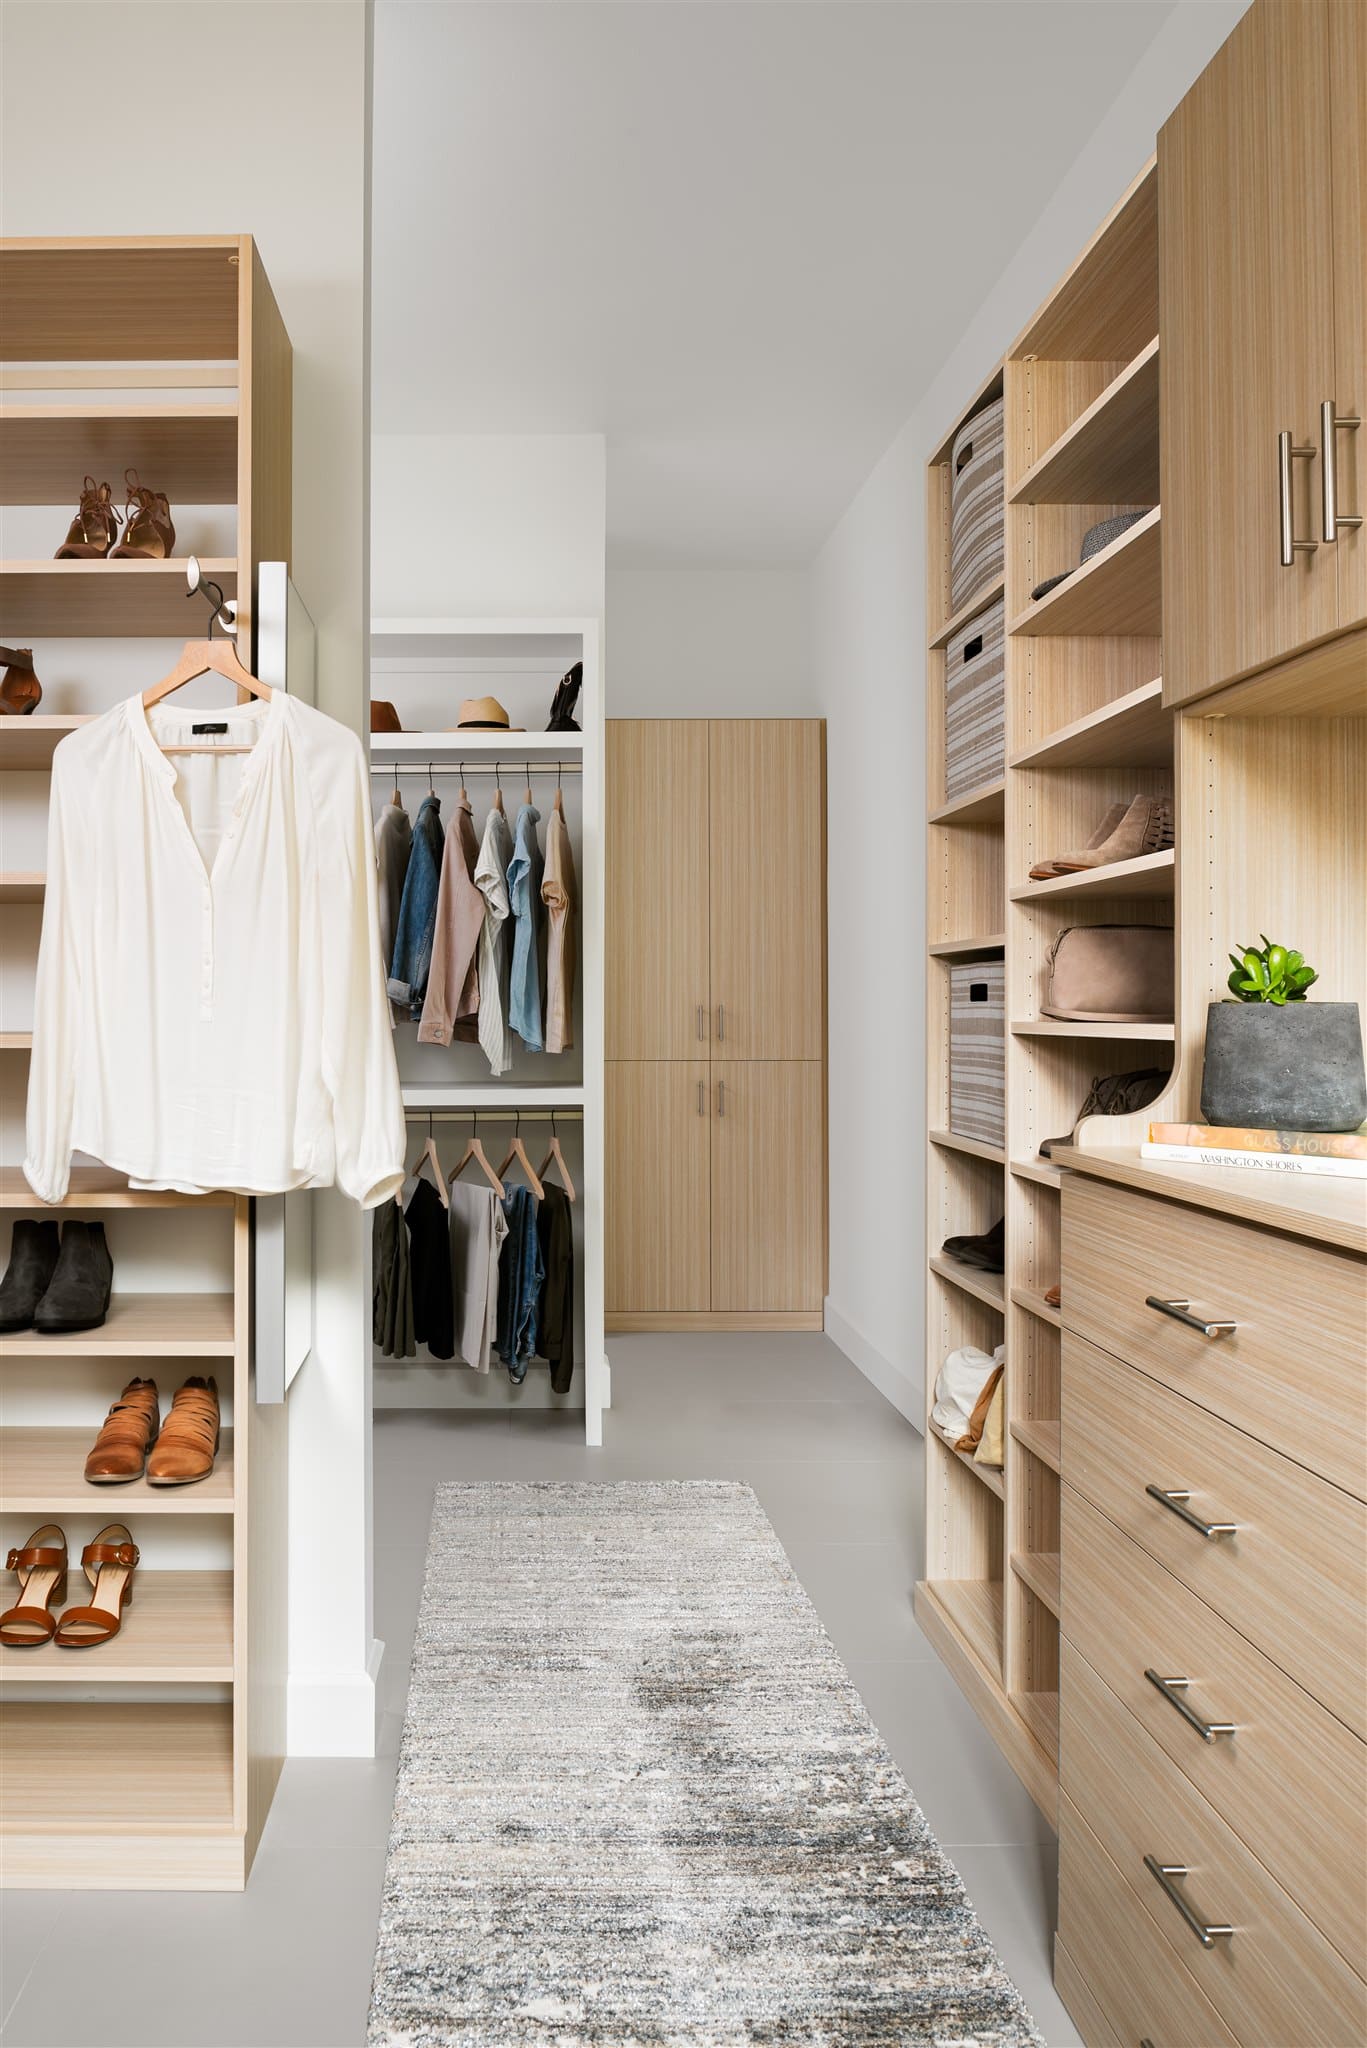 Our custom closet designs are flexible, functional, and stylish, creating a unique space in your home. Choose from accessories and features that heighten the look and functionality, individualized just for you. Discover versatile solutions for your home today!